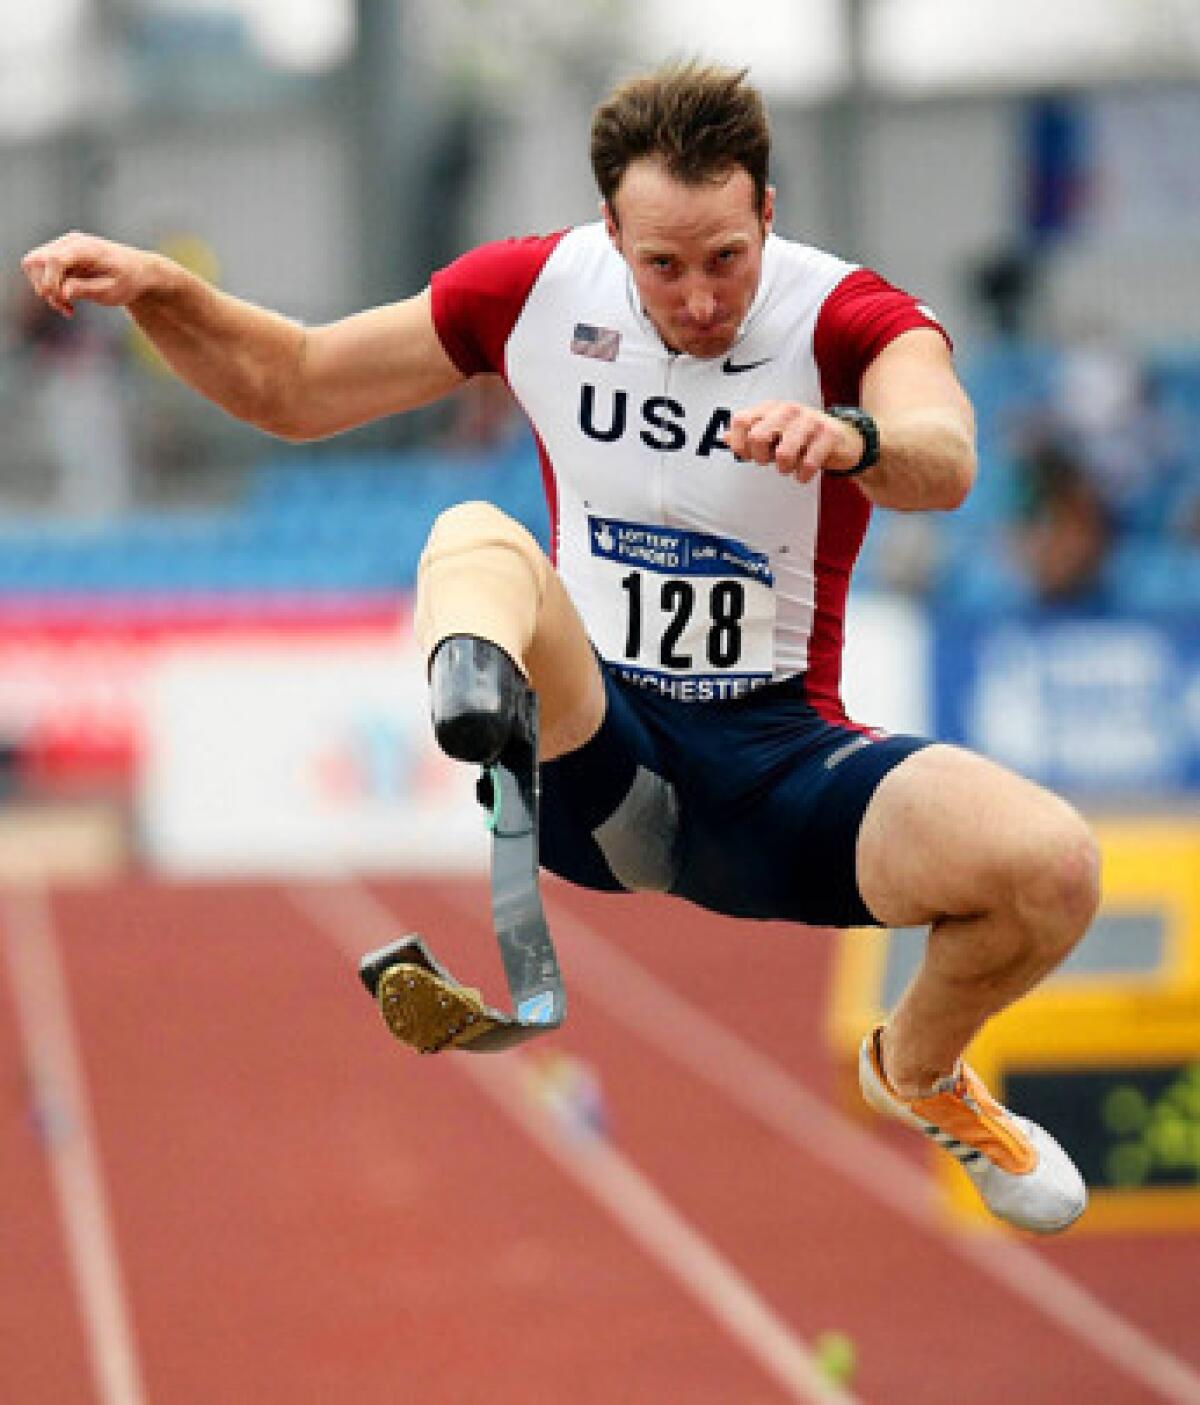 Casey Tibbs will travel to London for the Paralympic Games later this month.